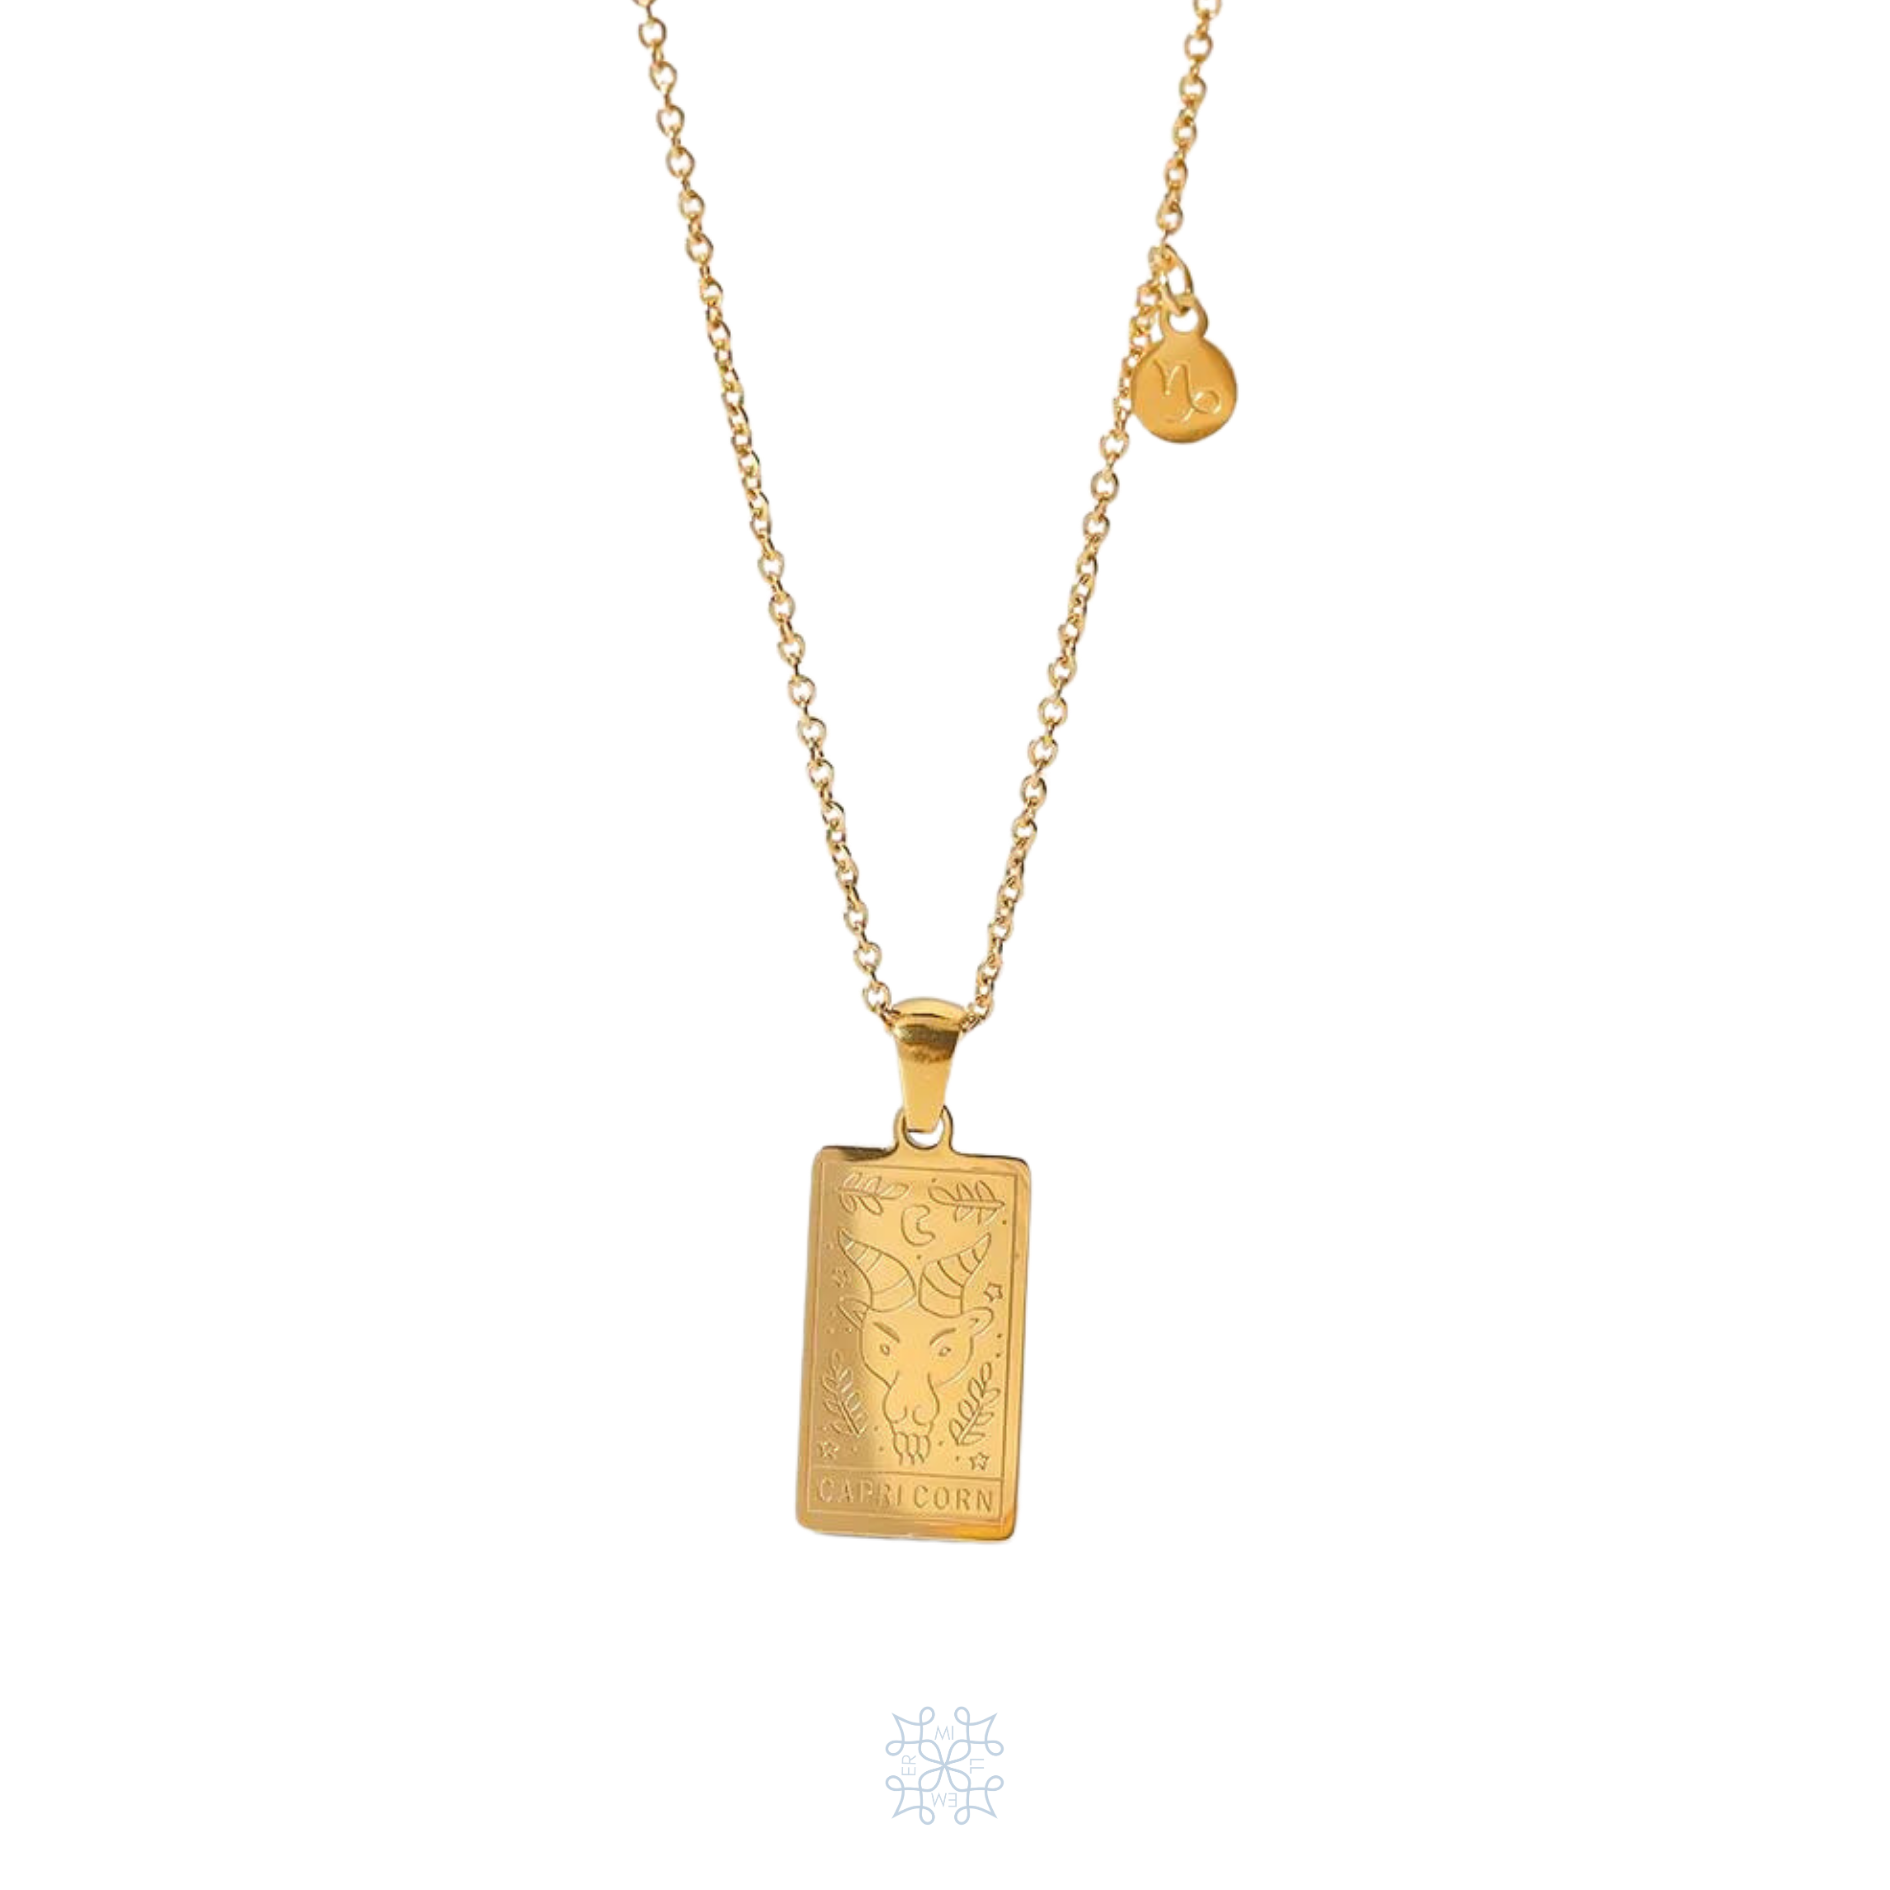 CAPRICORN Zodiac Pendant Gold Necklace. rectangular gold pendant. gold chain. the zodiacal sign of the goat with the goat's head is engraved on the pendant and the word capricorn is engraved on the bottom. at the side of the pendant attached on the chain is a small medallion with the capricorn symbol engraved on it.